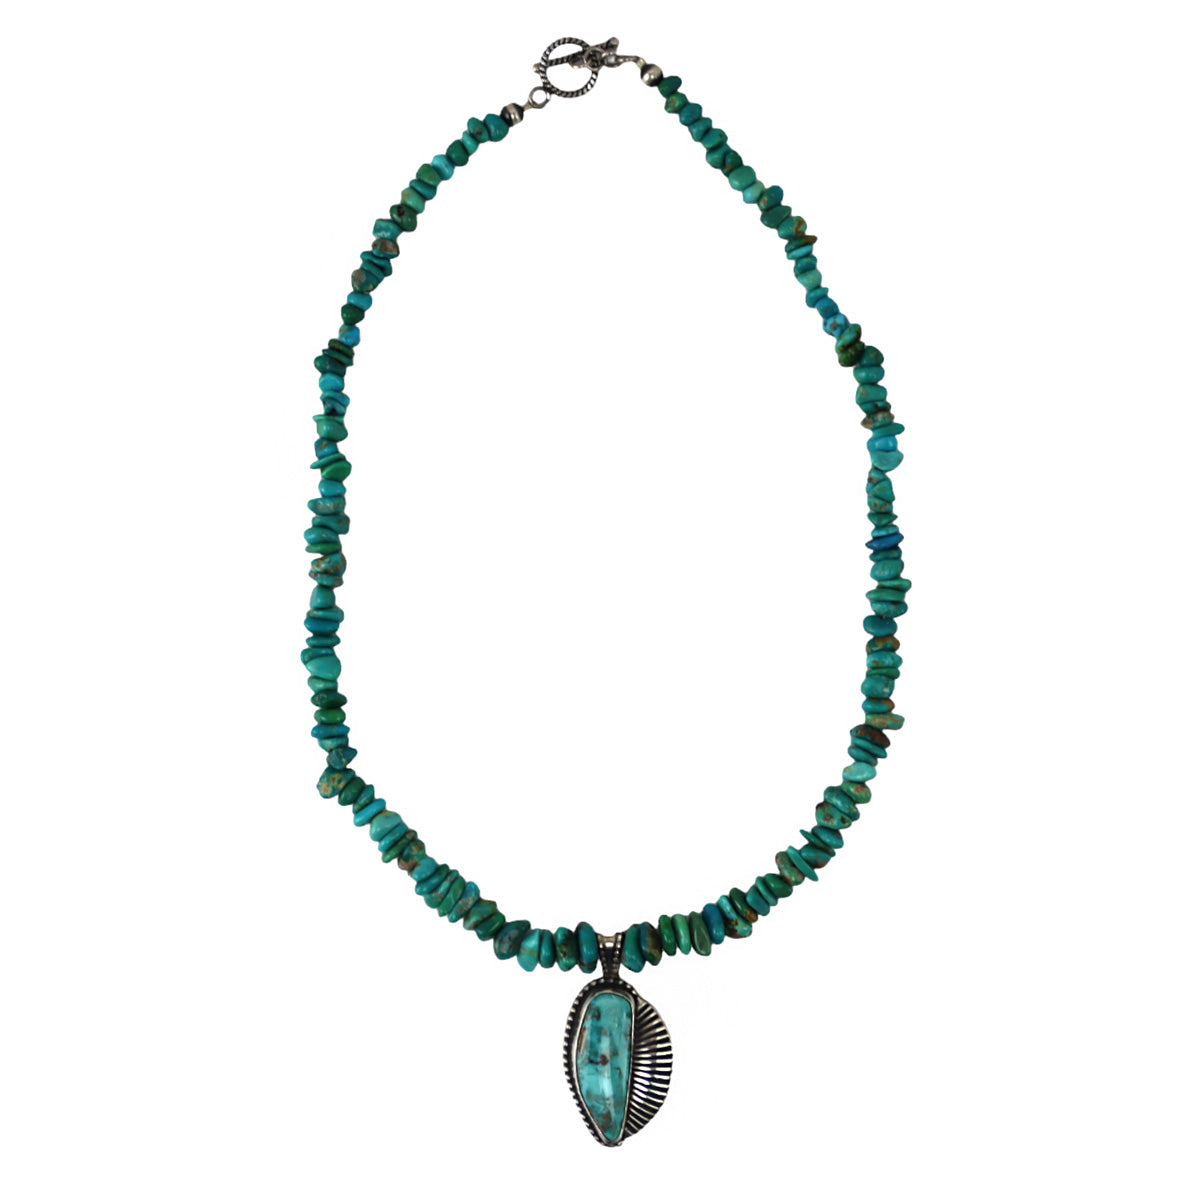 Geraldine Yazzie - Navajo - Turquoise and Silver Necklace c. 1990-2000s, 18" length (J16064-043)